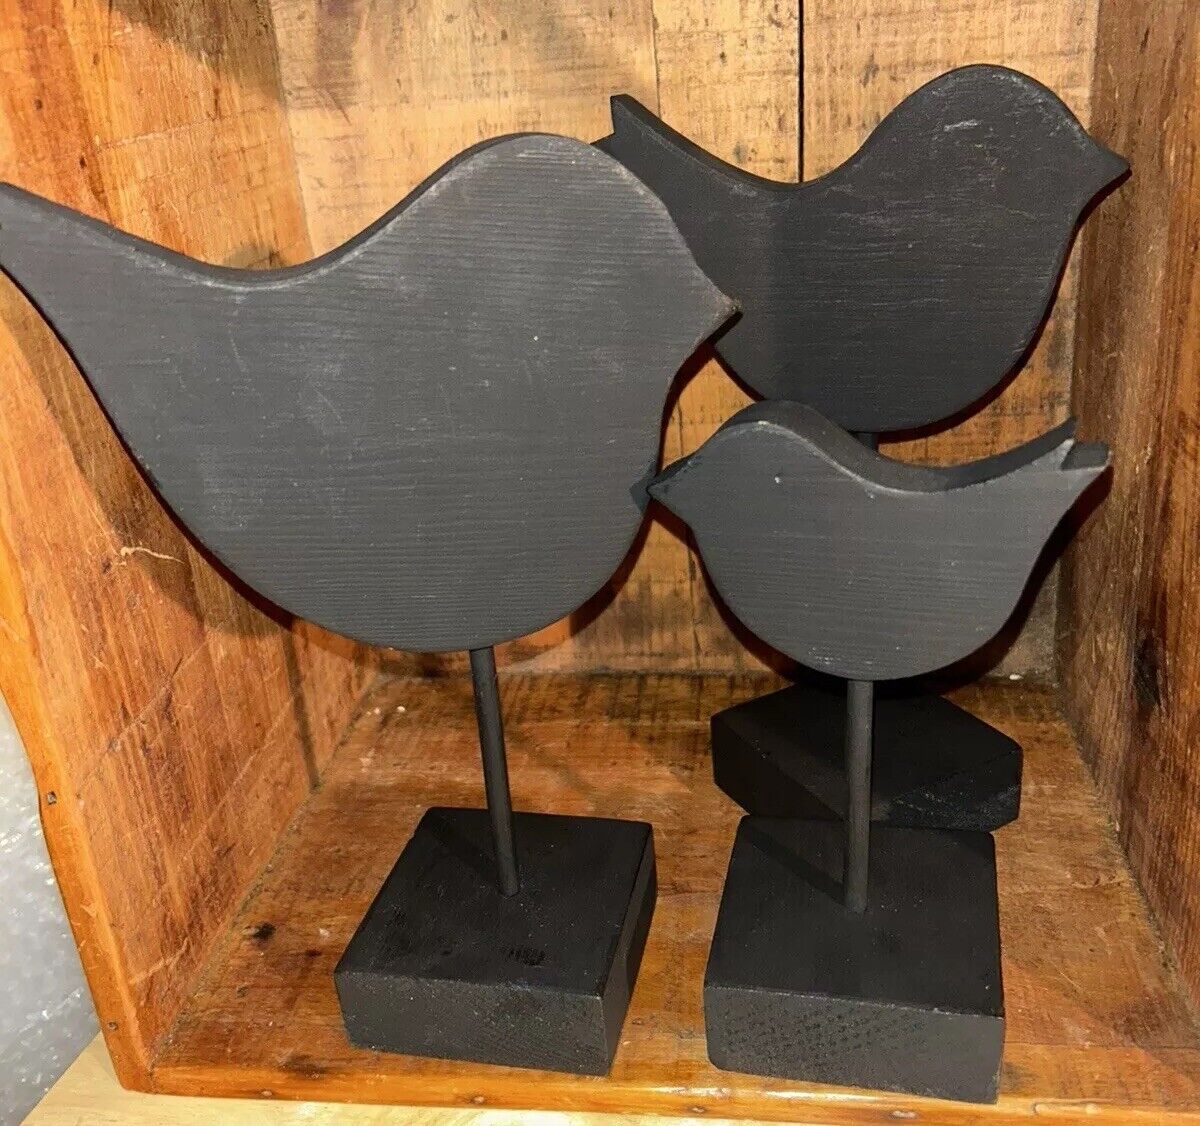 3 Wooden Birds Black Silhouettes. 3 Different Sizes: 9”, 8.75”, 6.25” Song Birds